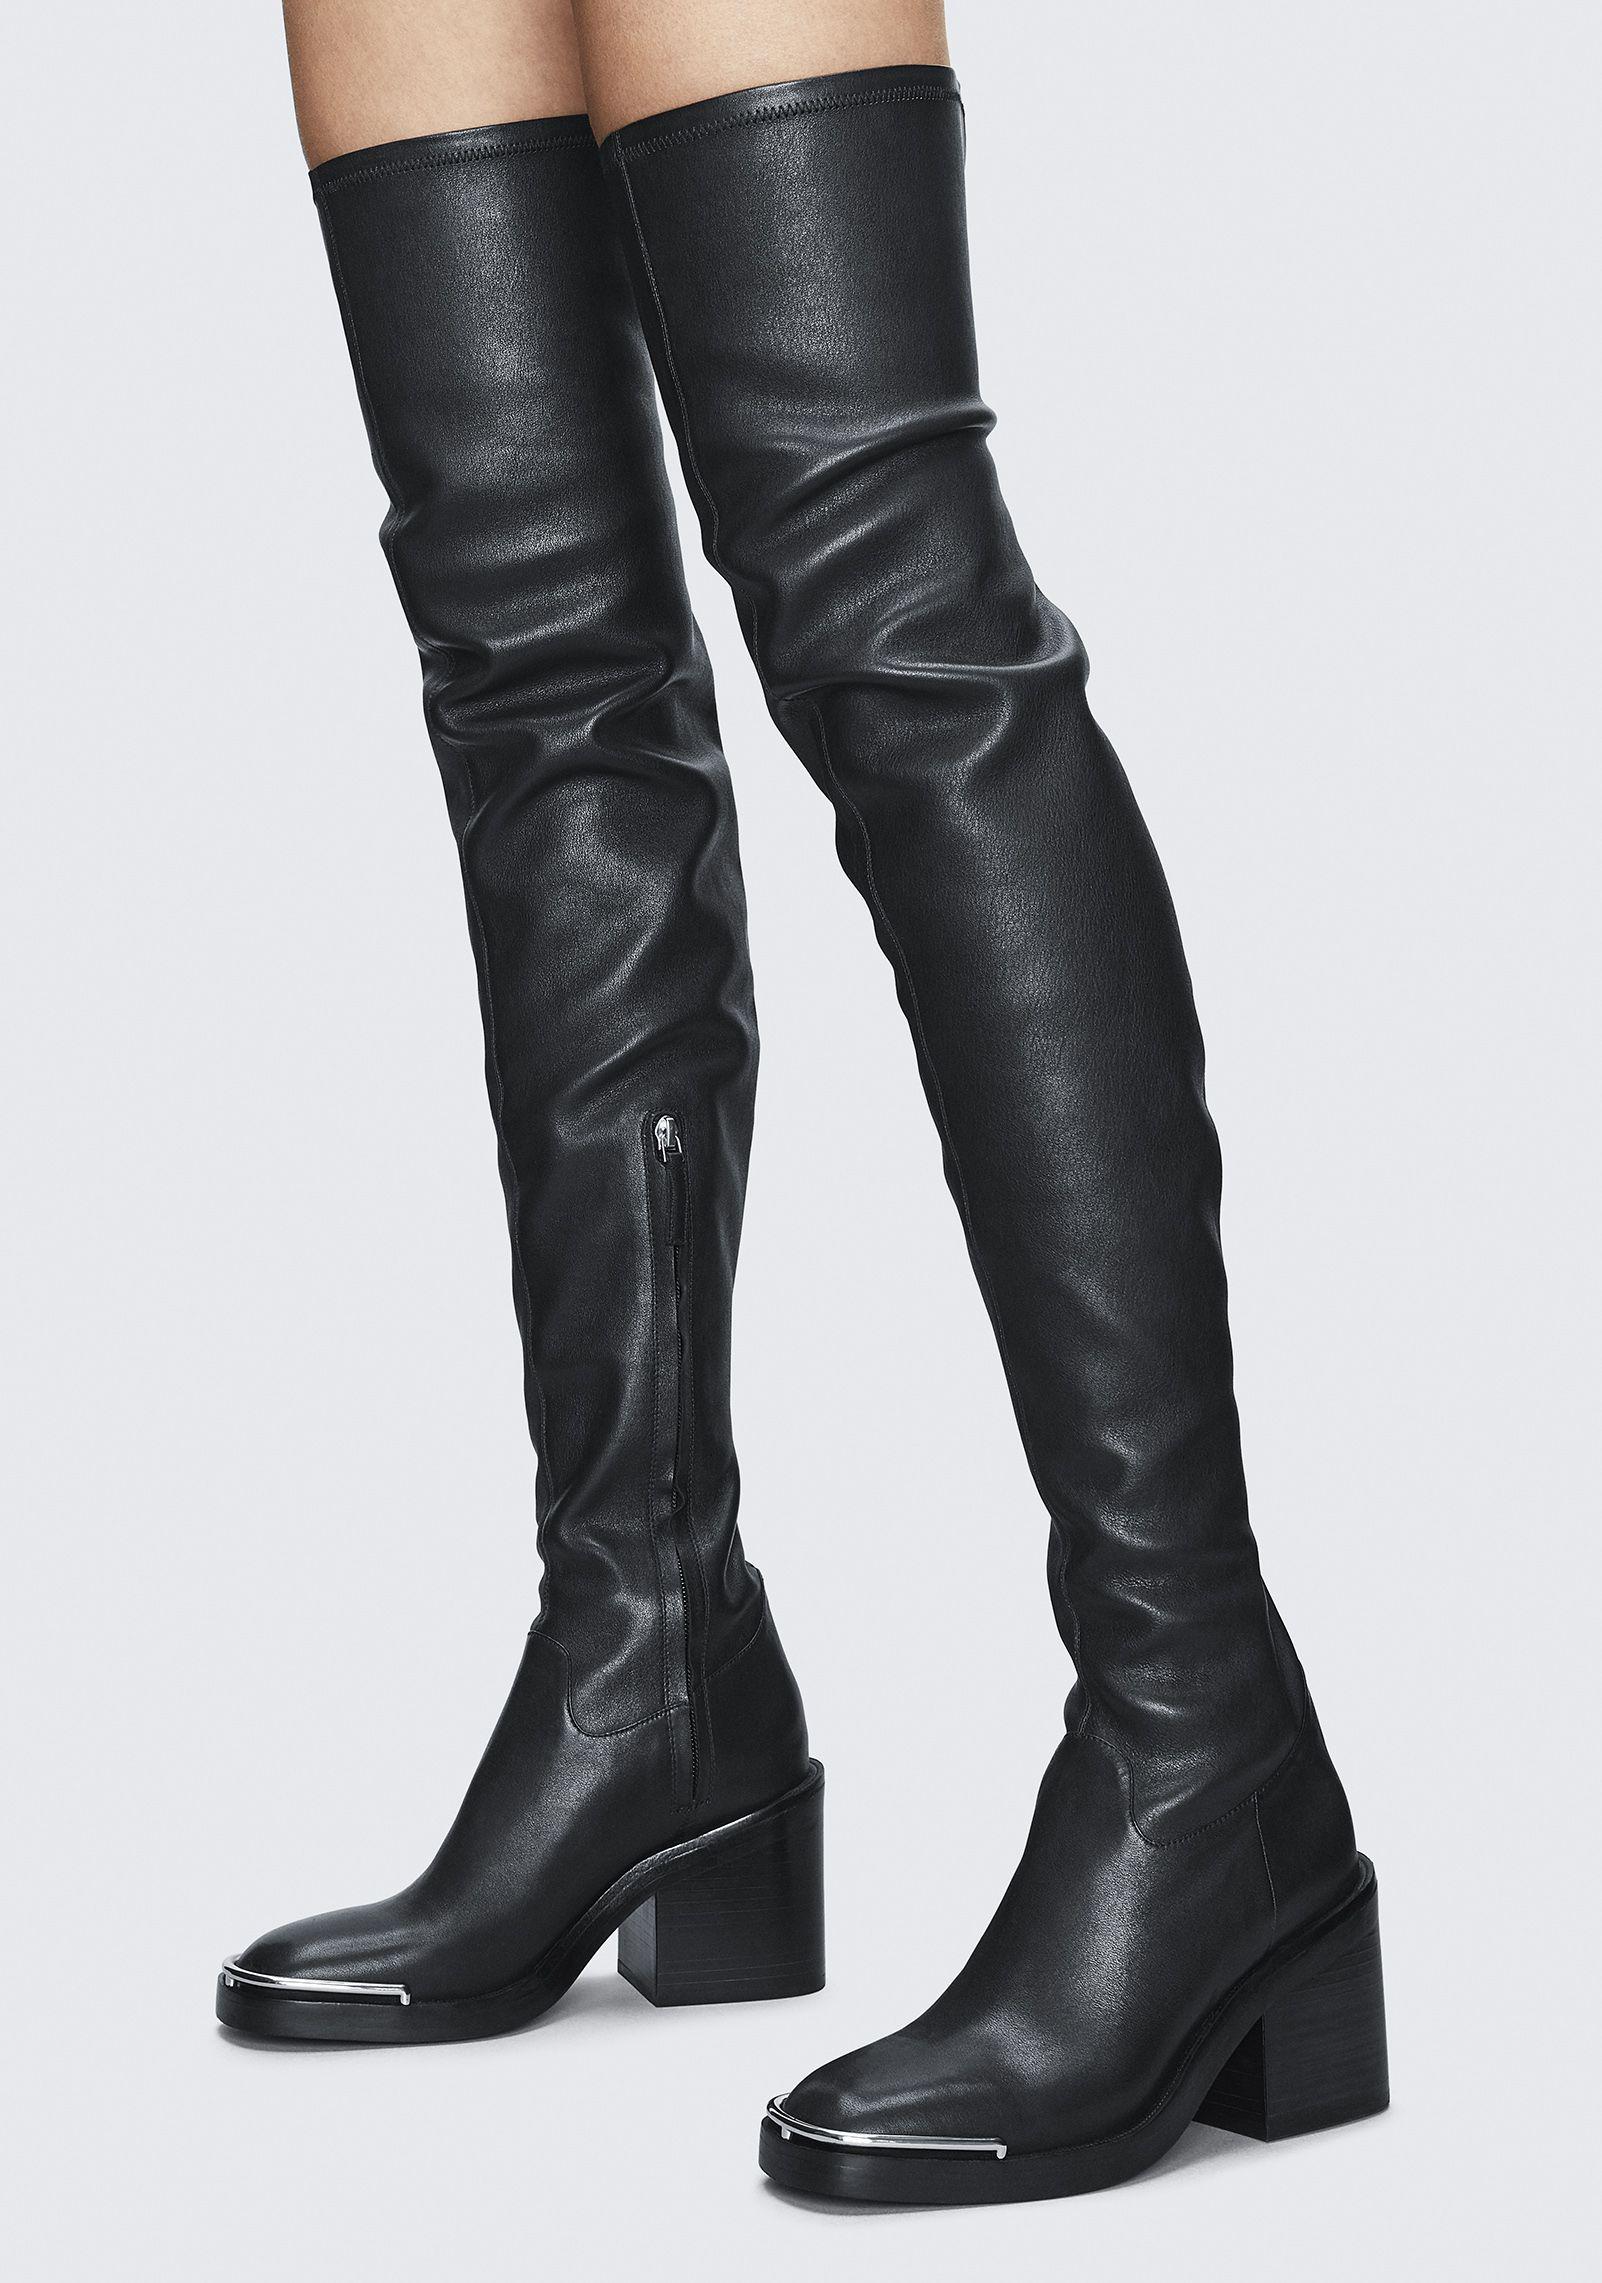 alexander wang boots height for Sale,Up To OFF 71%